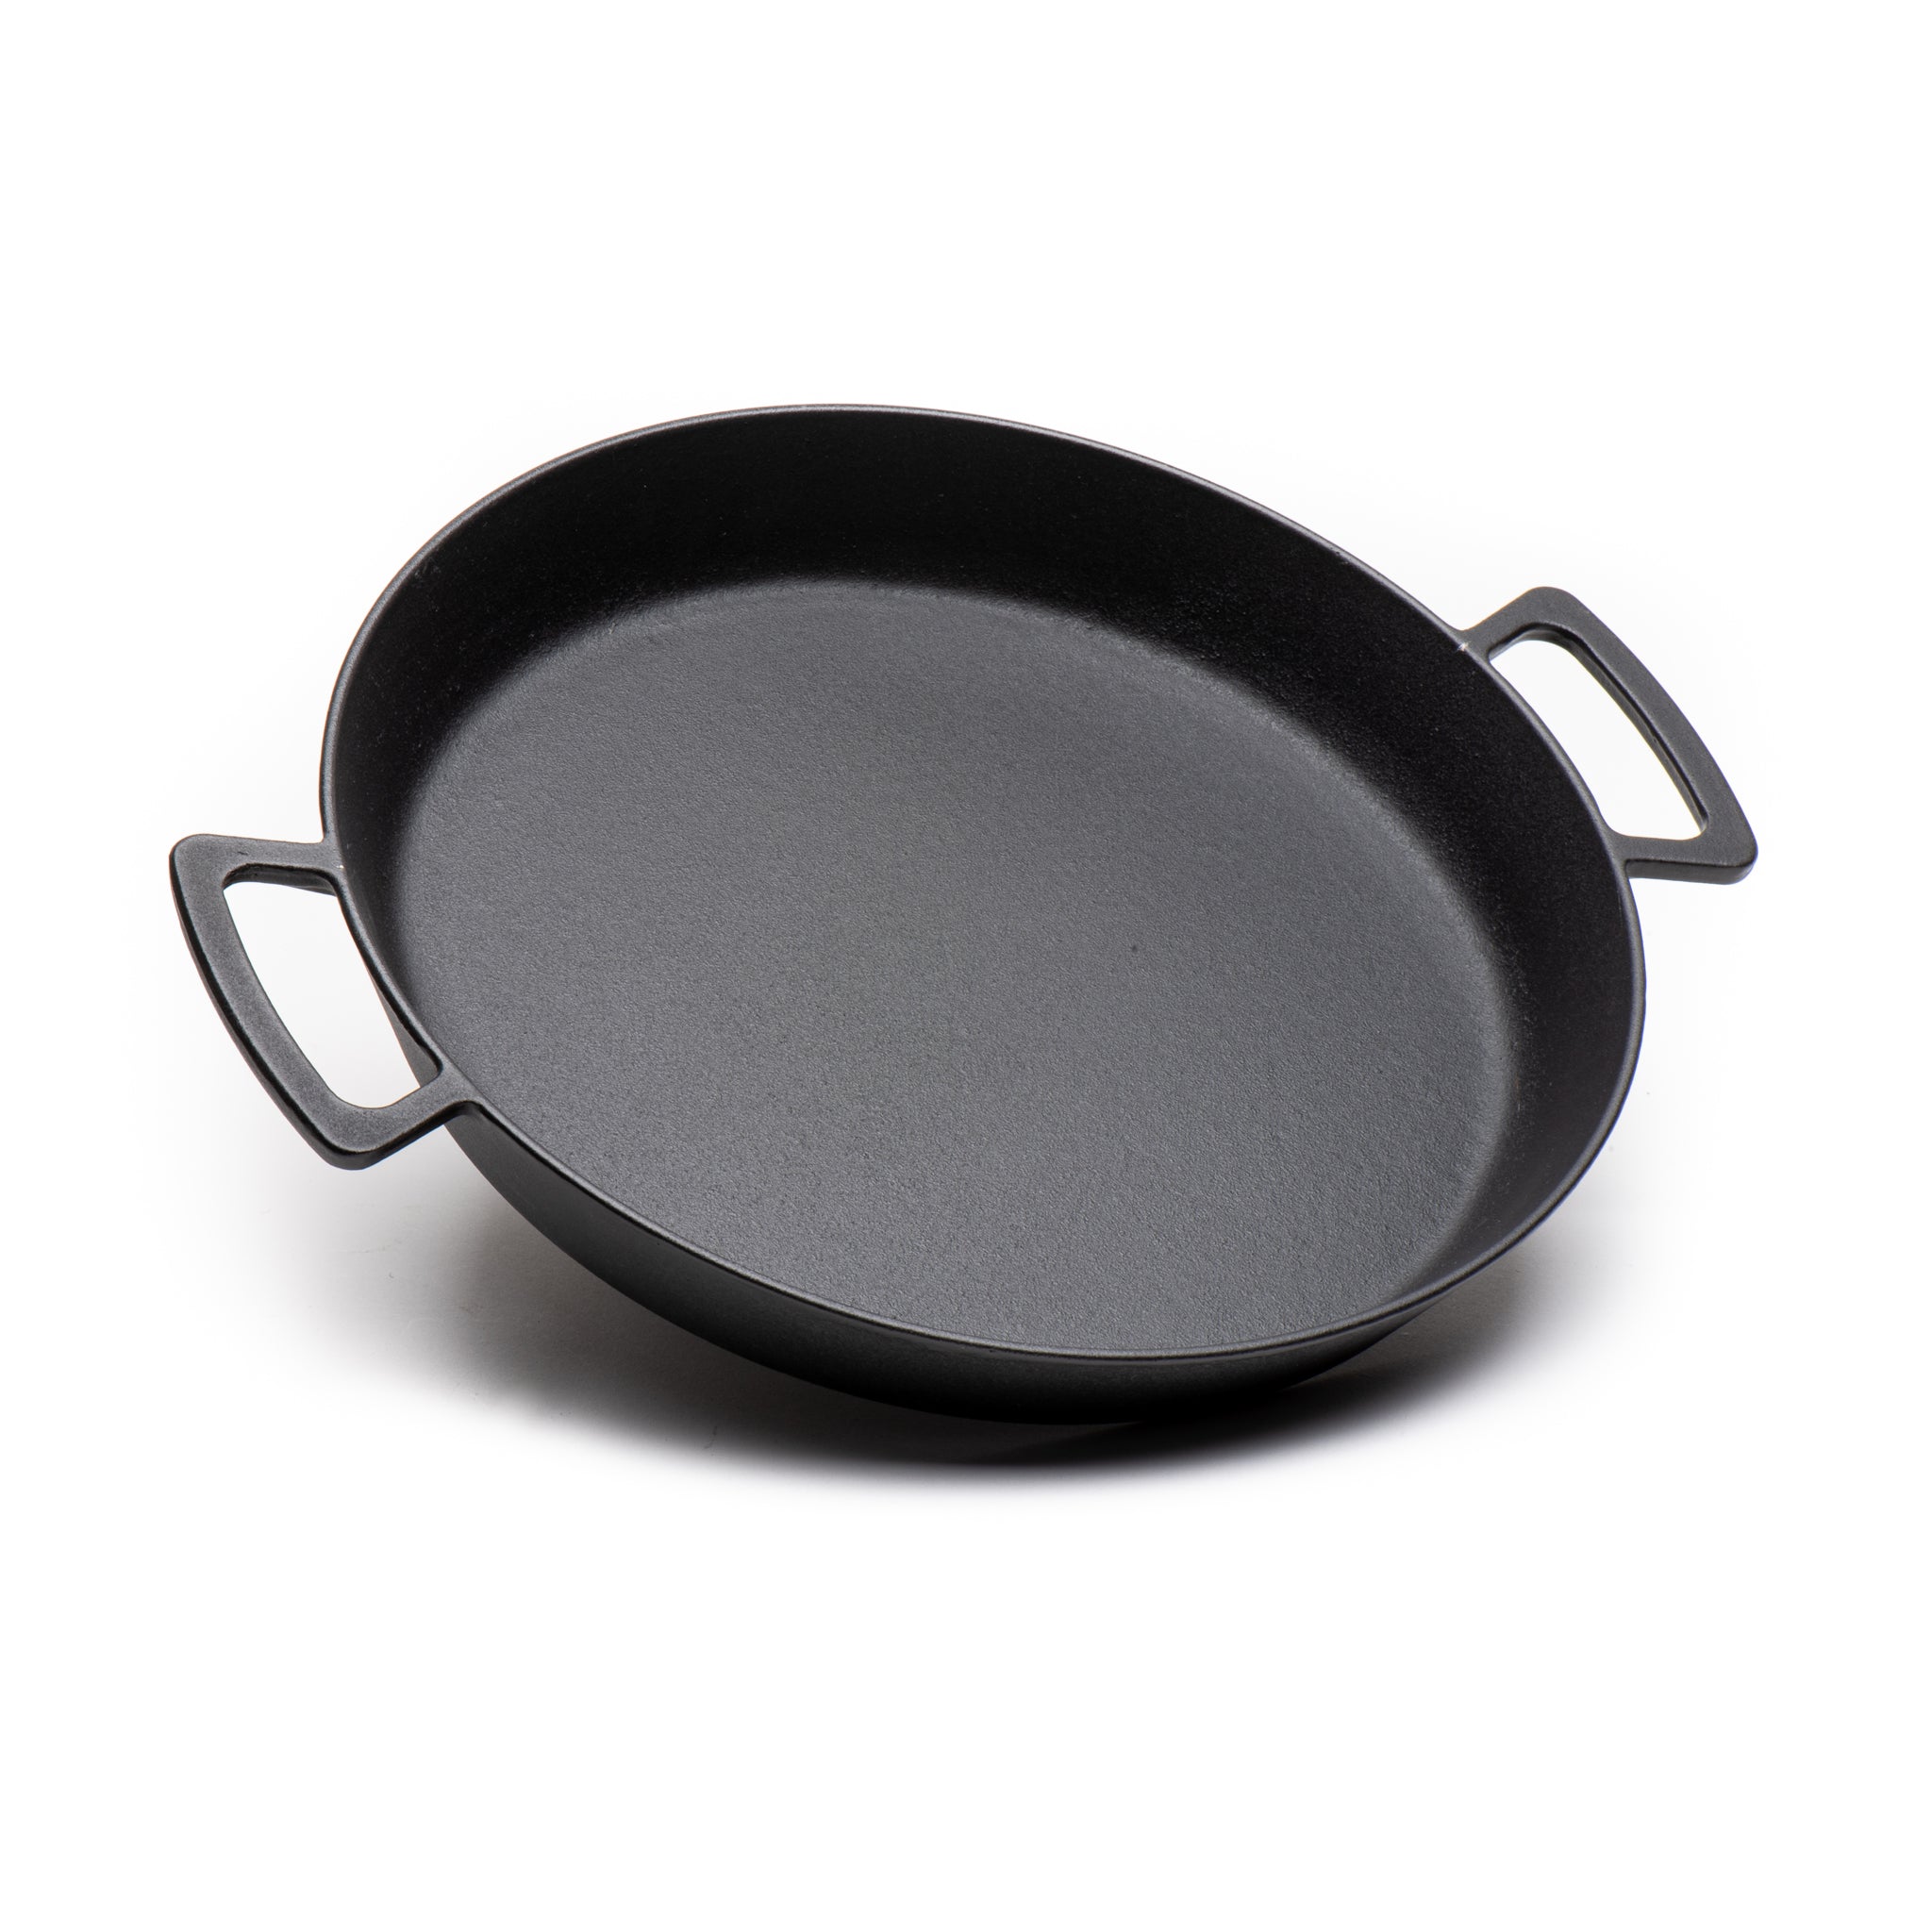 Outset Deep Dish Cast Iron Grill Pan for Pizza and Paella 76613